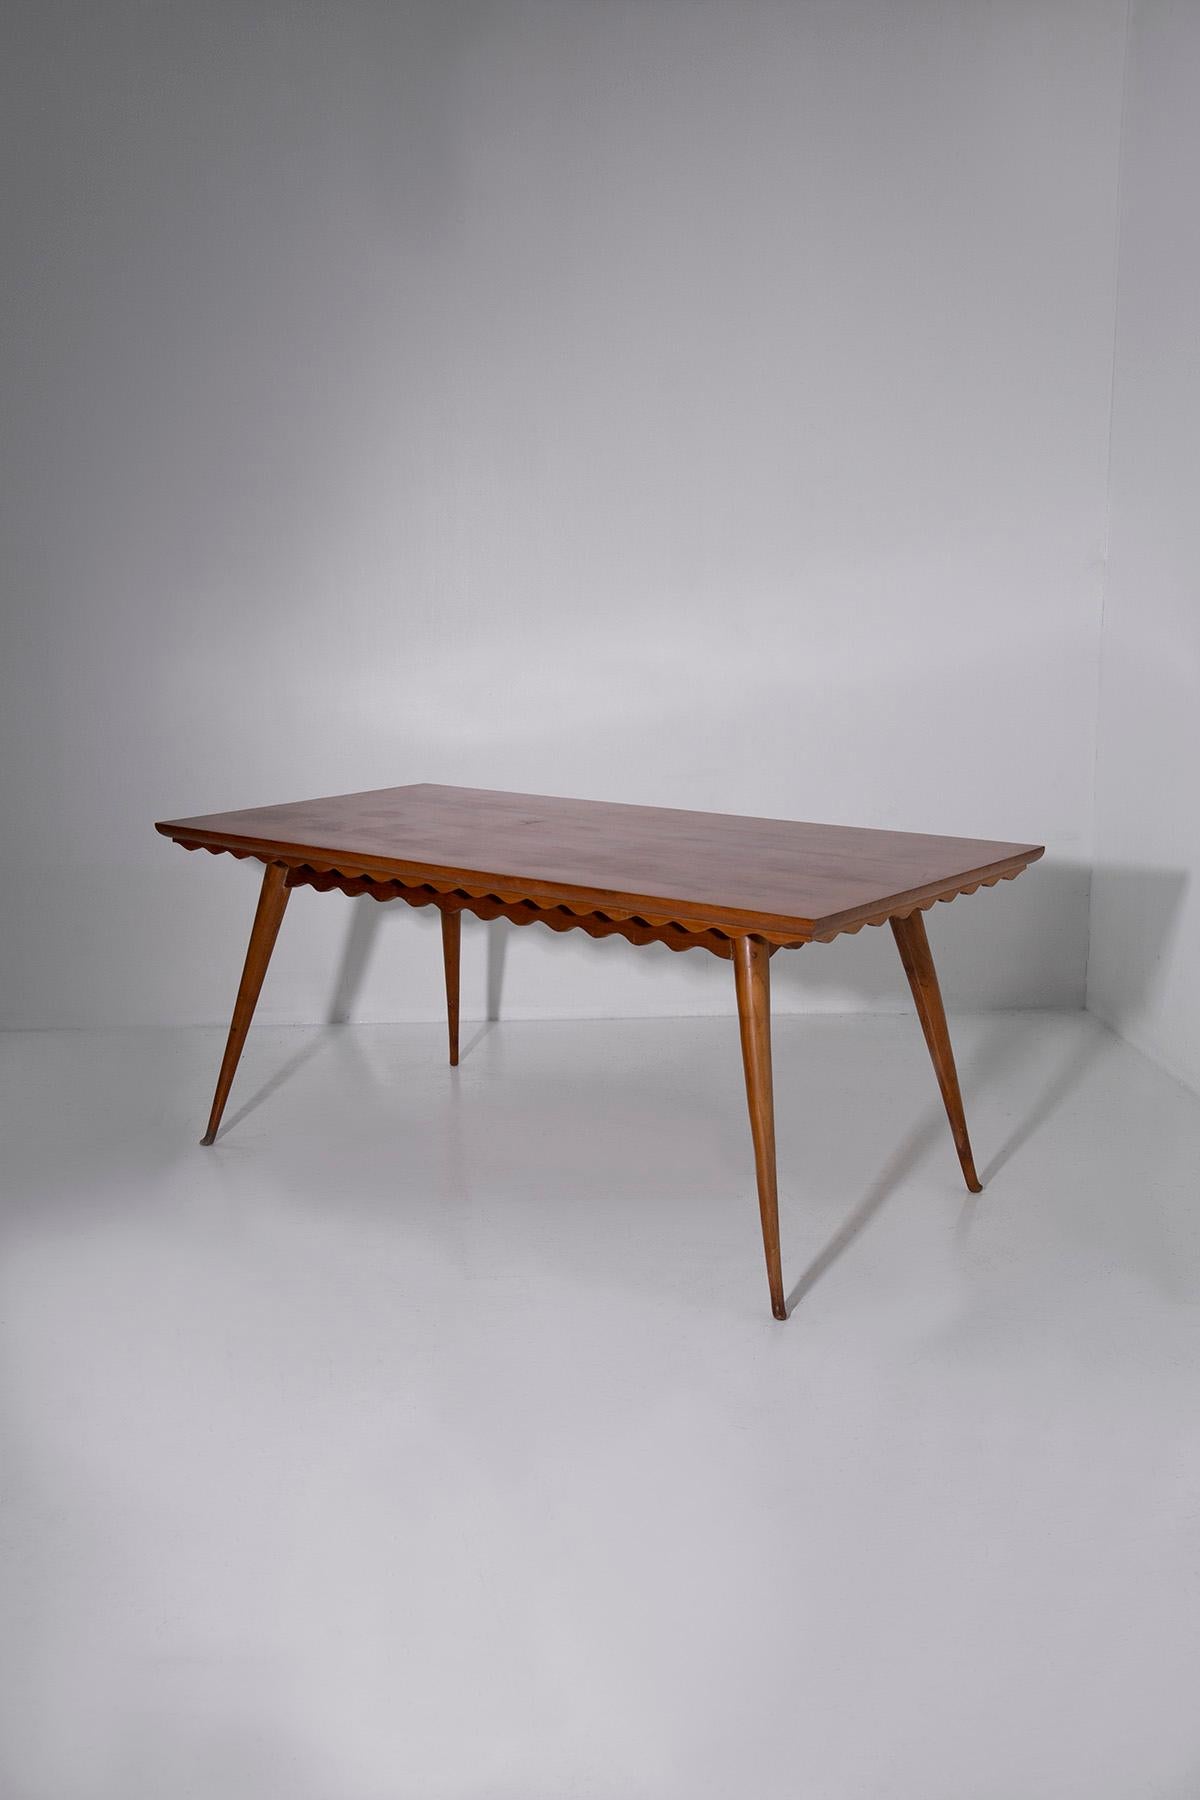 Step into the timeless elegance of mid-century Italian design with this exquisite dining table attributed to the masterful Paolo Buffa. Crafted in the 1950s, this table stands as a testament to the unparalleled craftsmanship and refined aesthetic of